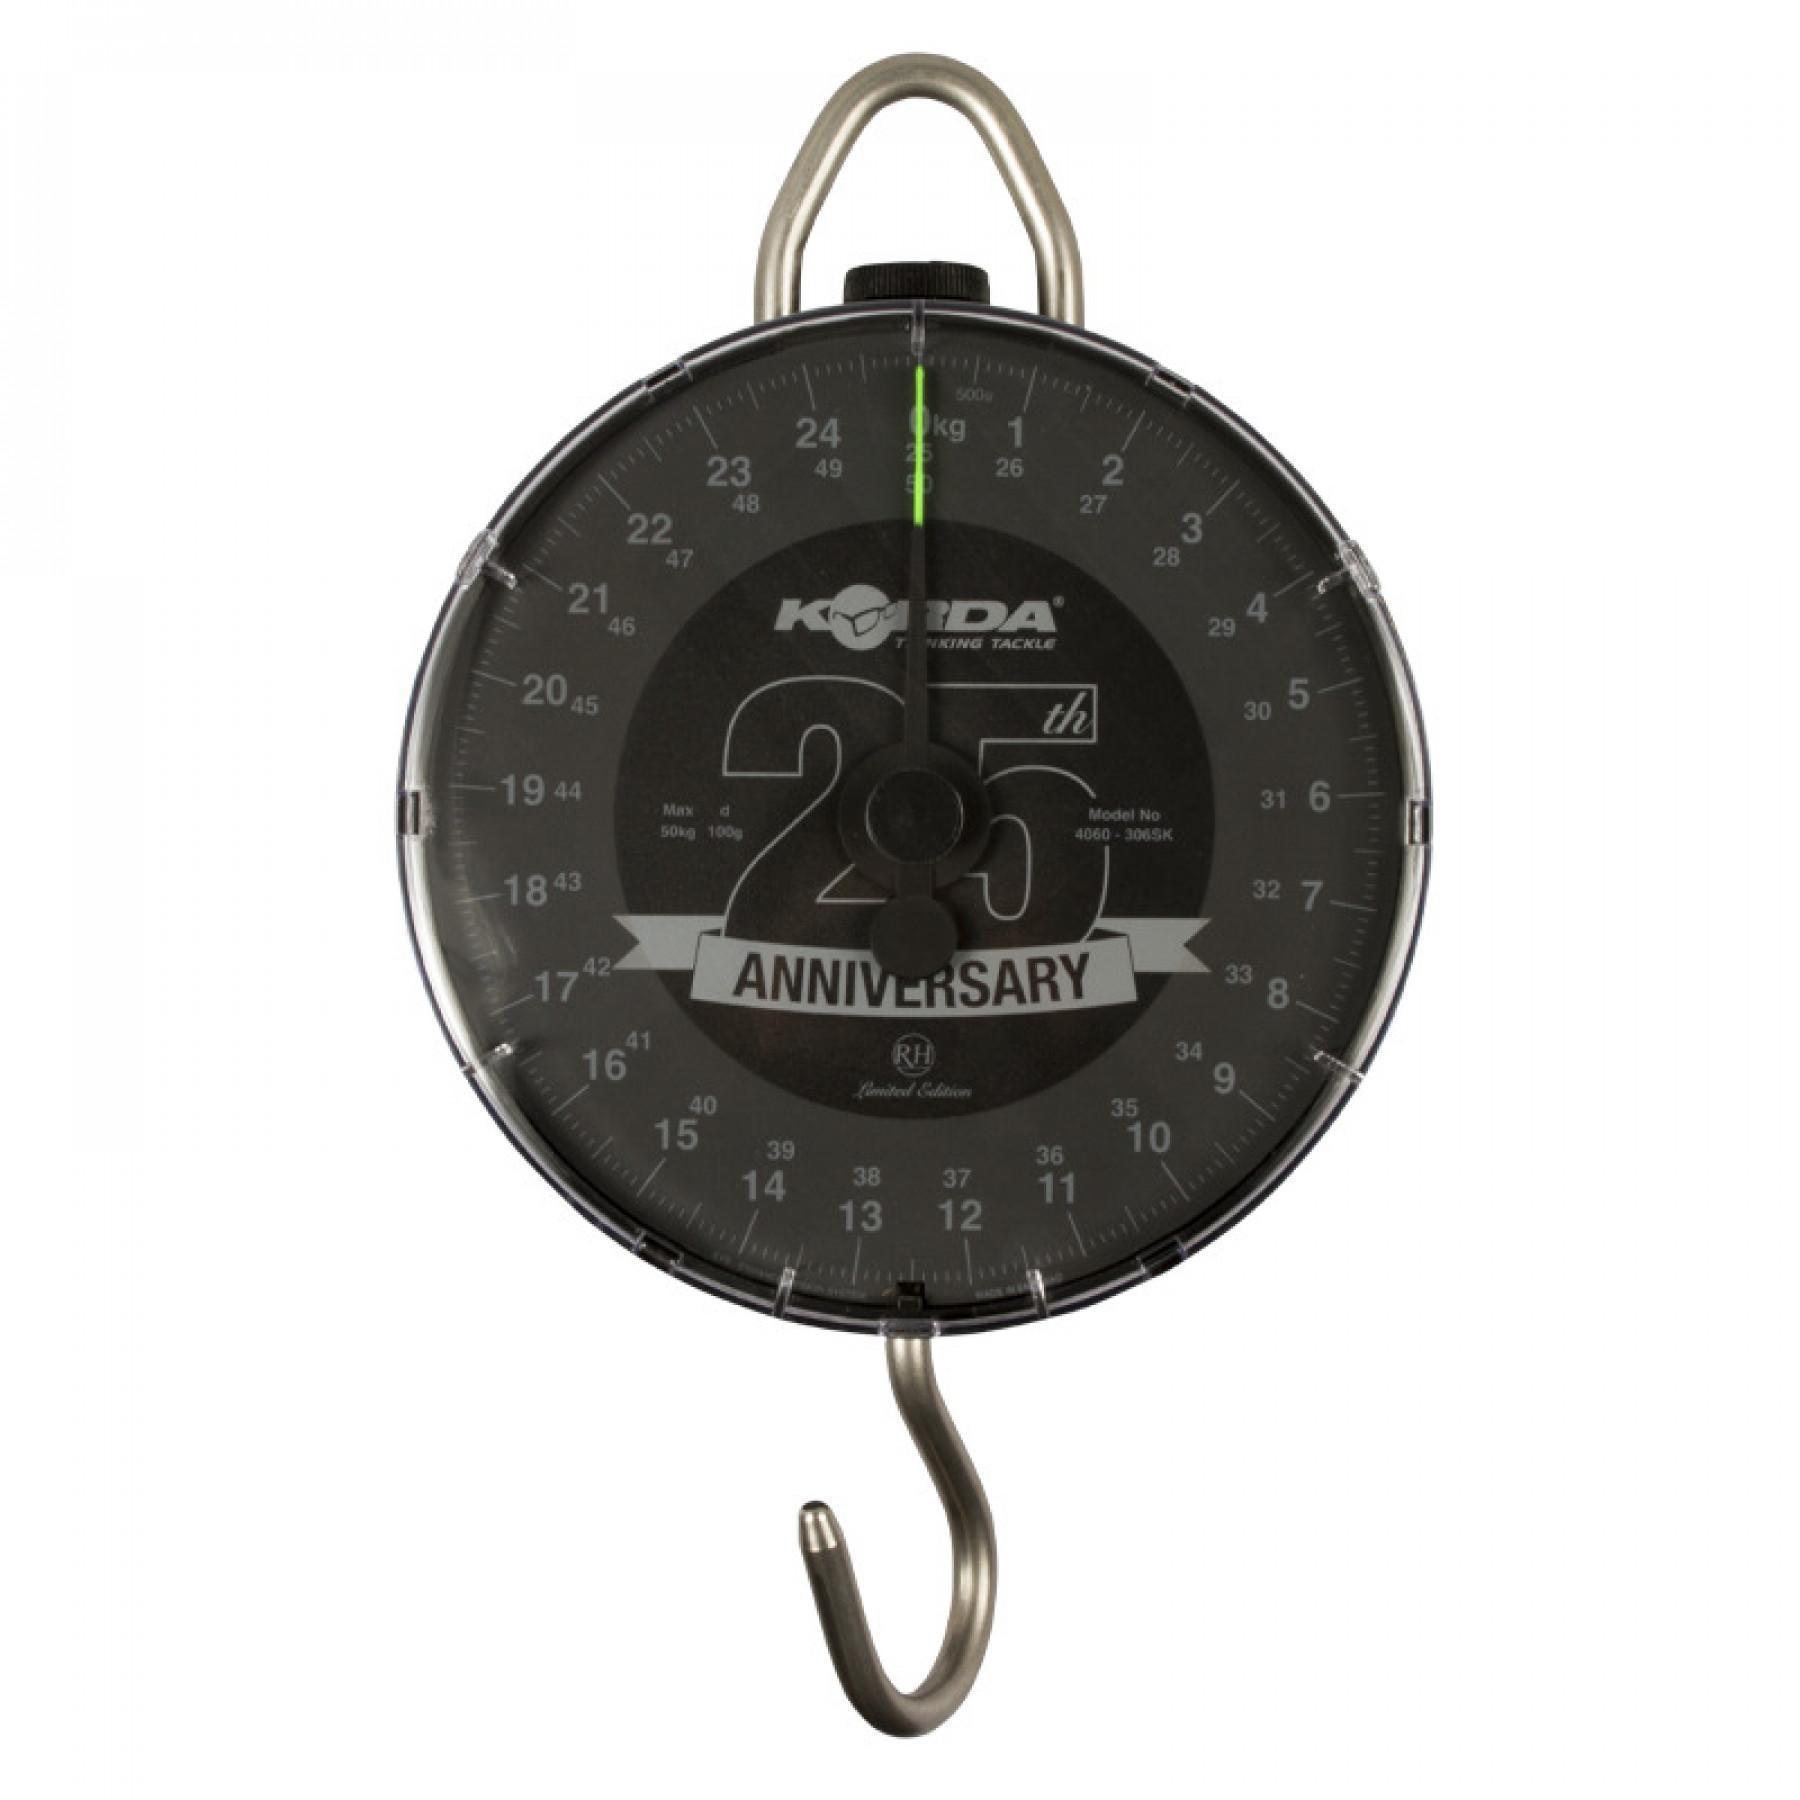 Peson Korda Dial Scales - 25th Anniversary Edition